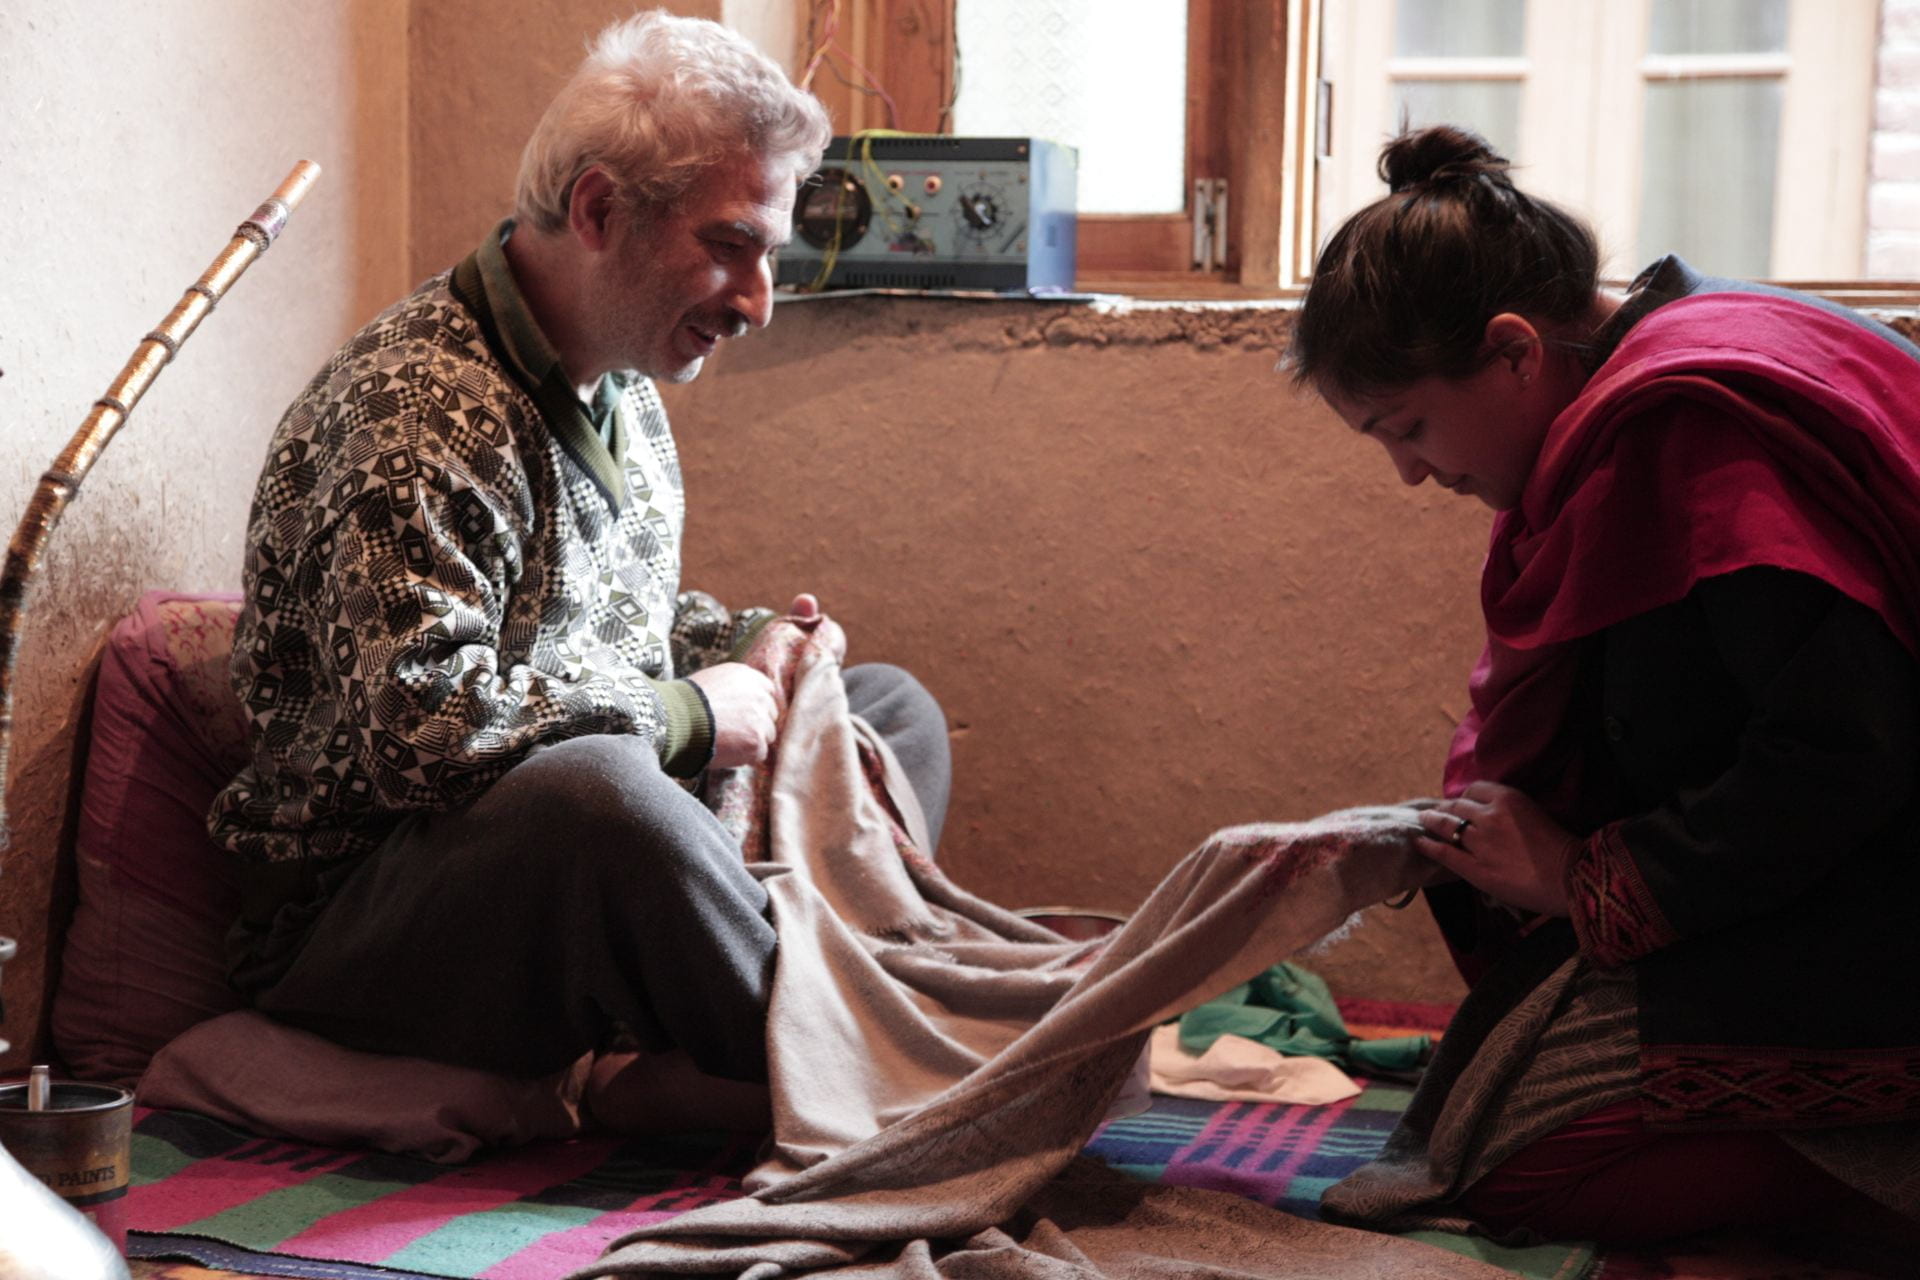 A Kashmiri man and woman sit next to each other on the ground while working on sewing a piece of fabric. 